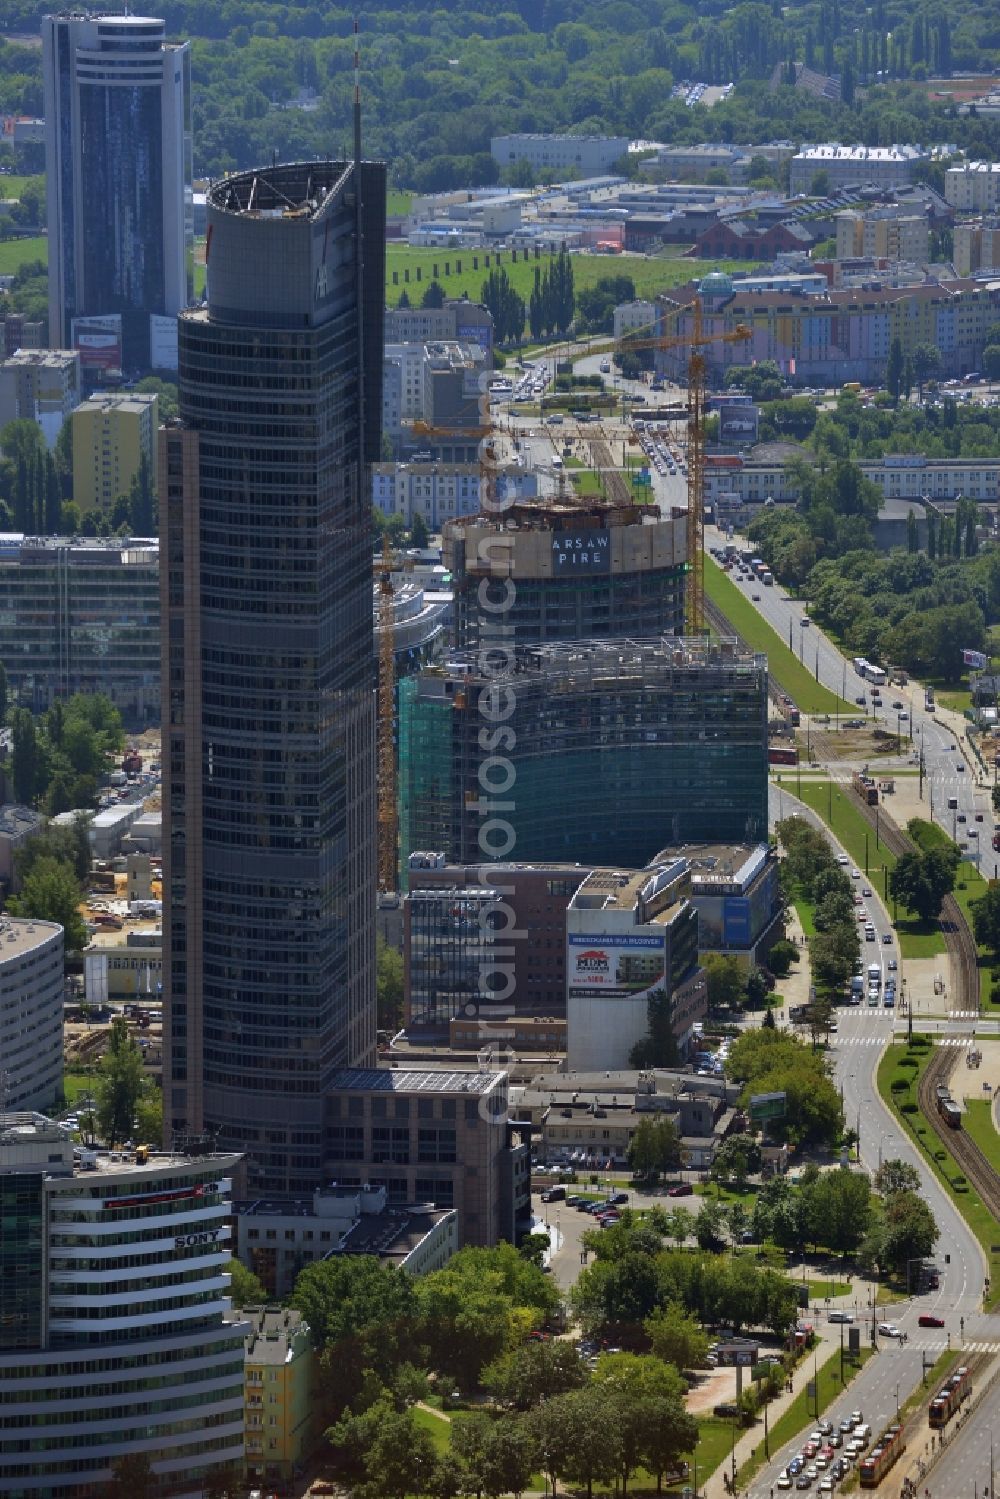 Warschau from above - Warsaw Trade Tower in the Wola district of Warsaw in Poland. The skyscraper is an office building whose primary tenant is the insurance company AXA. Its logo is very well visible on the upper floors. The tower is over 200m high and has Europe's fastest elevator. It was completed in 1999 after two years of construction and is the second tallest building in Warsaw